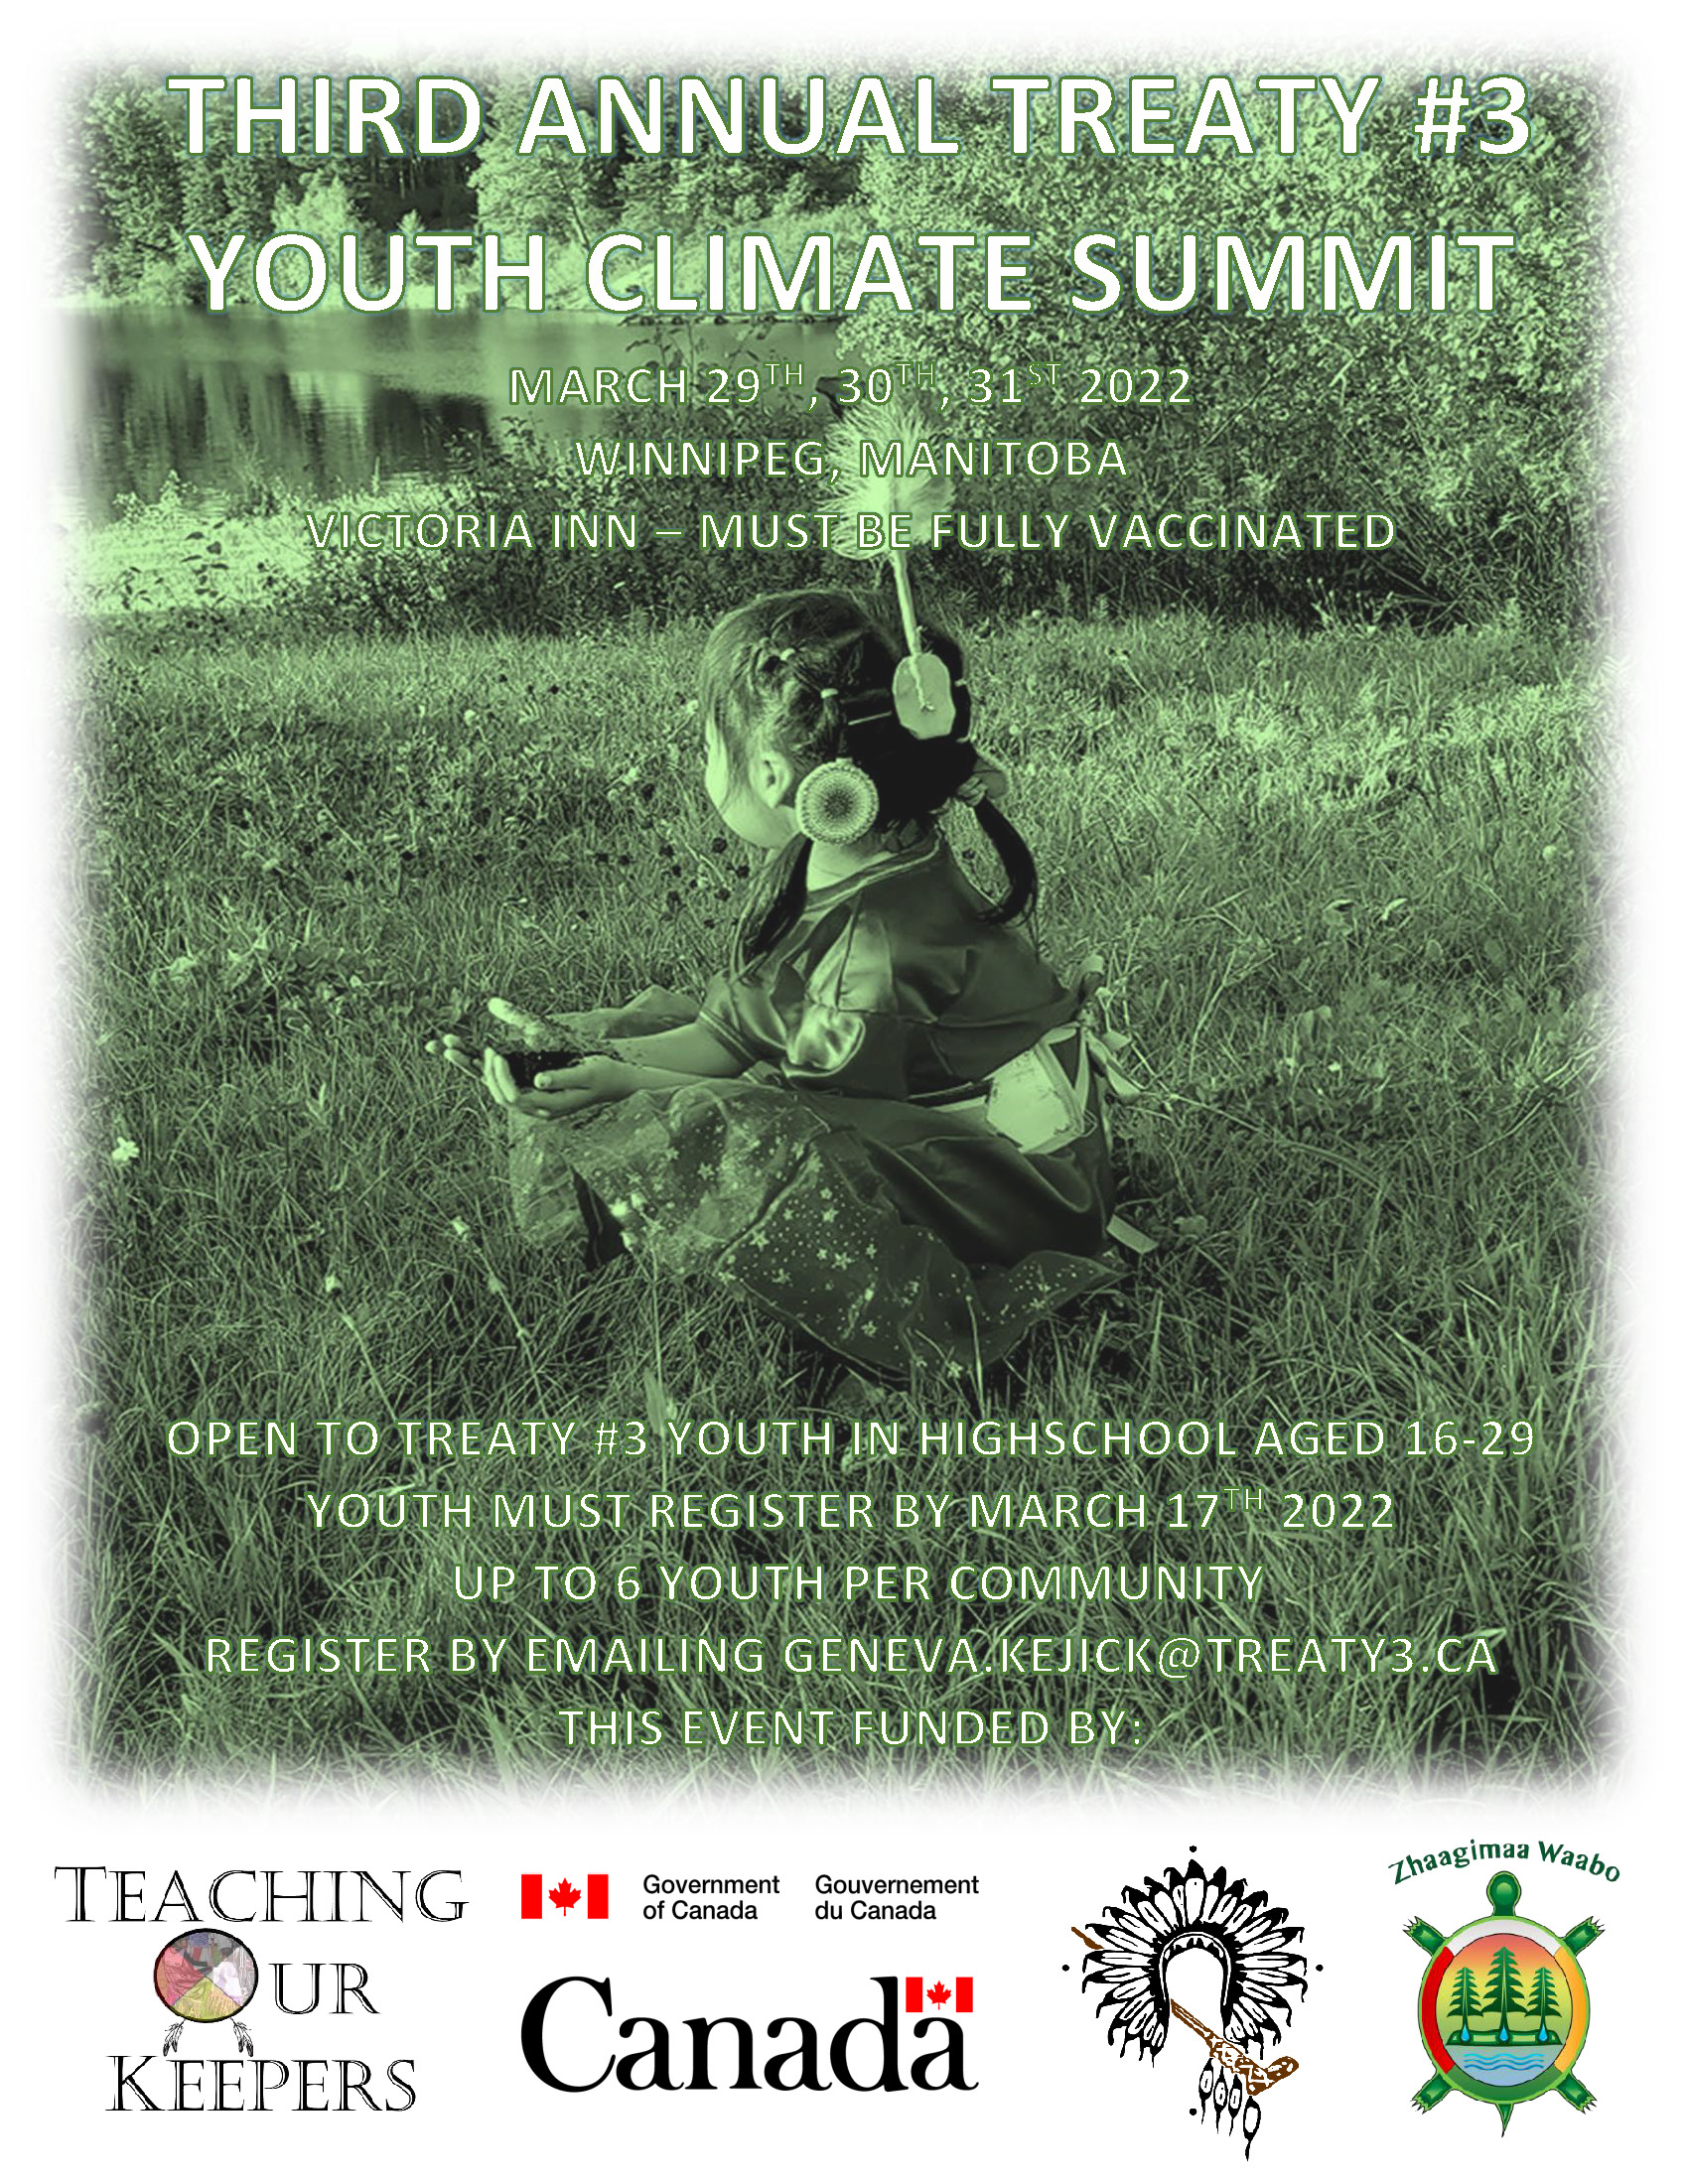 3rd Annual Treaty #3 Youth Climate Summit